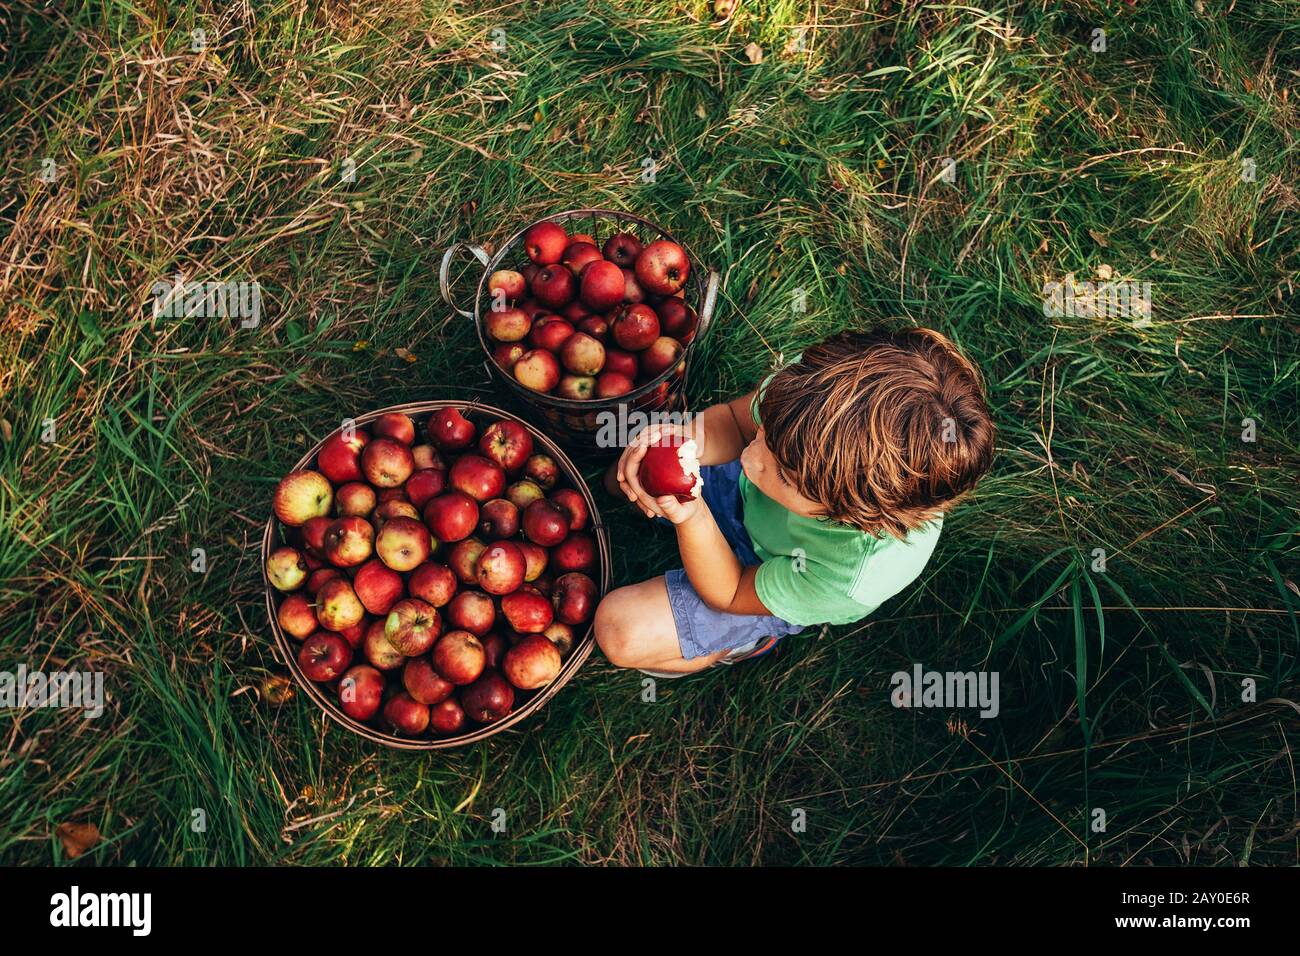 Overhead view of a Boy sitting in an orchard eating an apple, USA Stock Photo